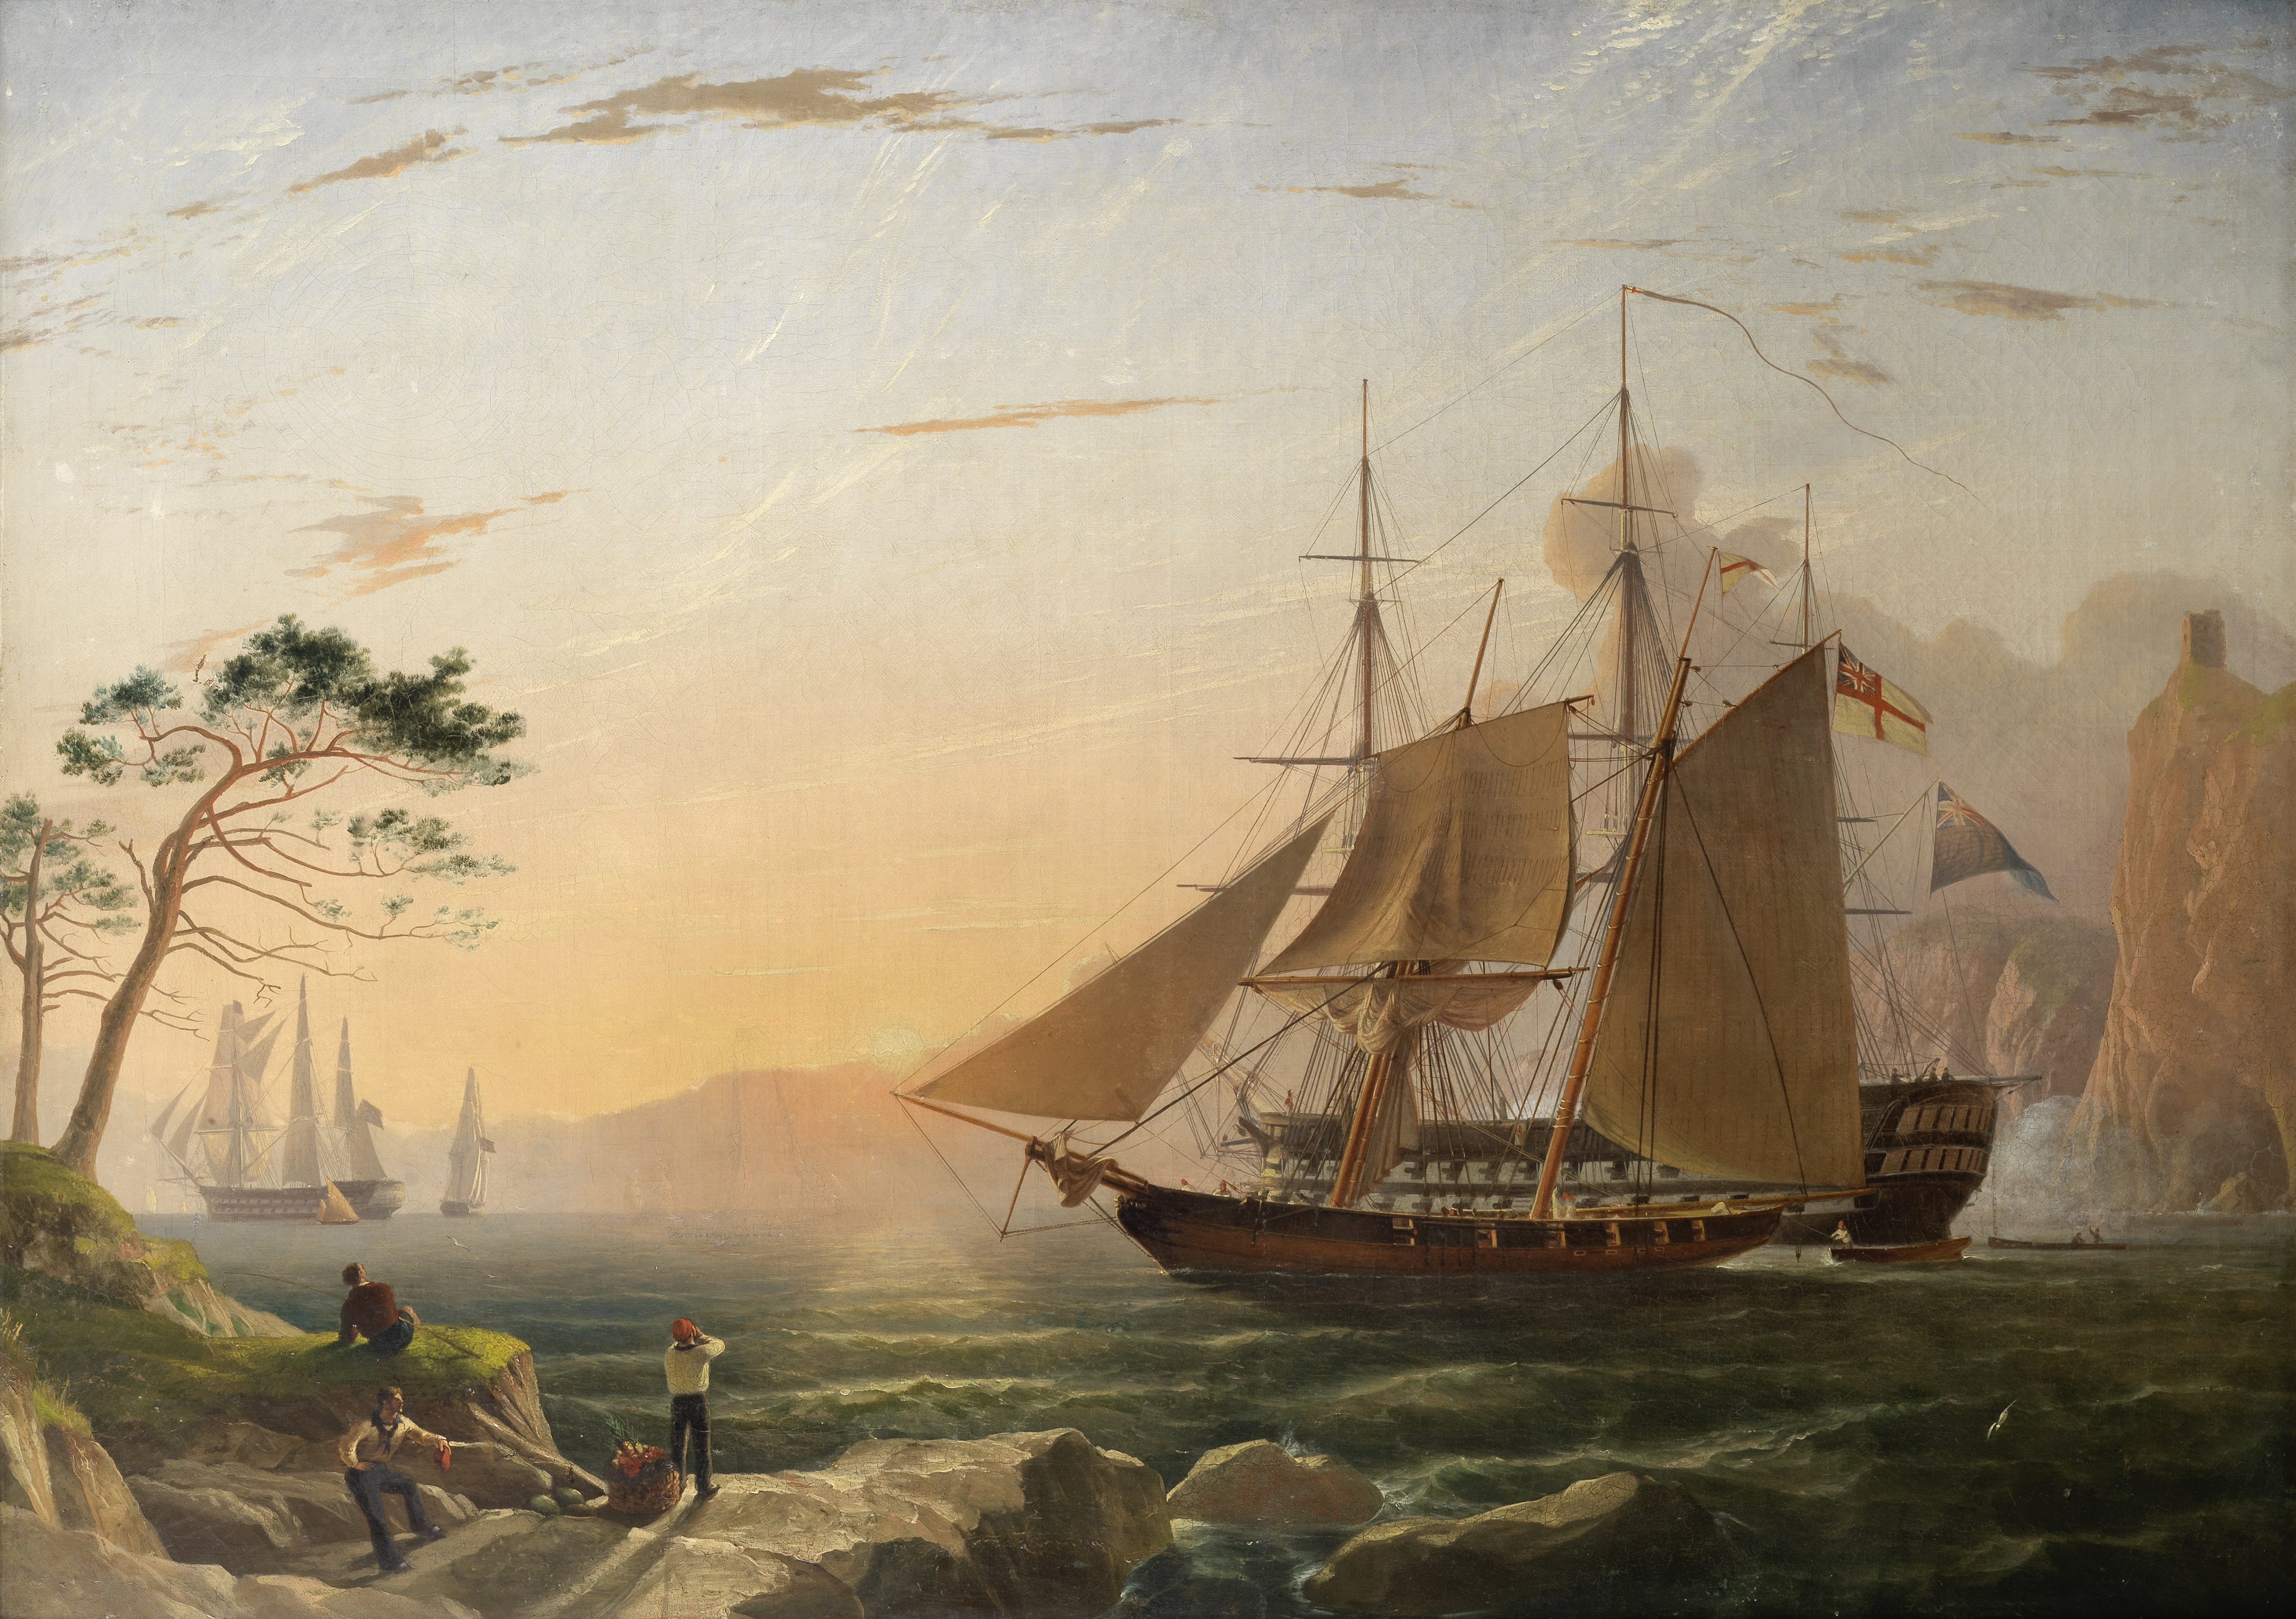 Charles Henry Seaforth (British, 1801-died after 1859) The King's ships getting underway in Medit...